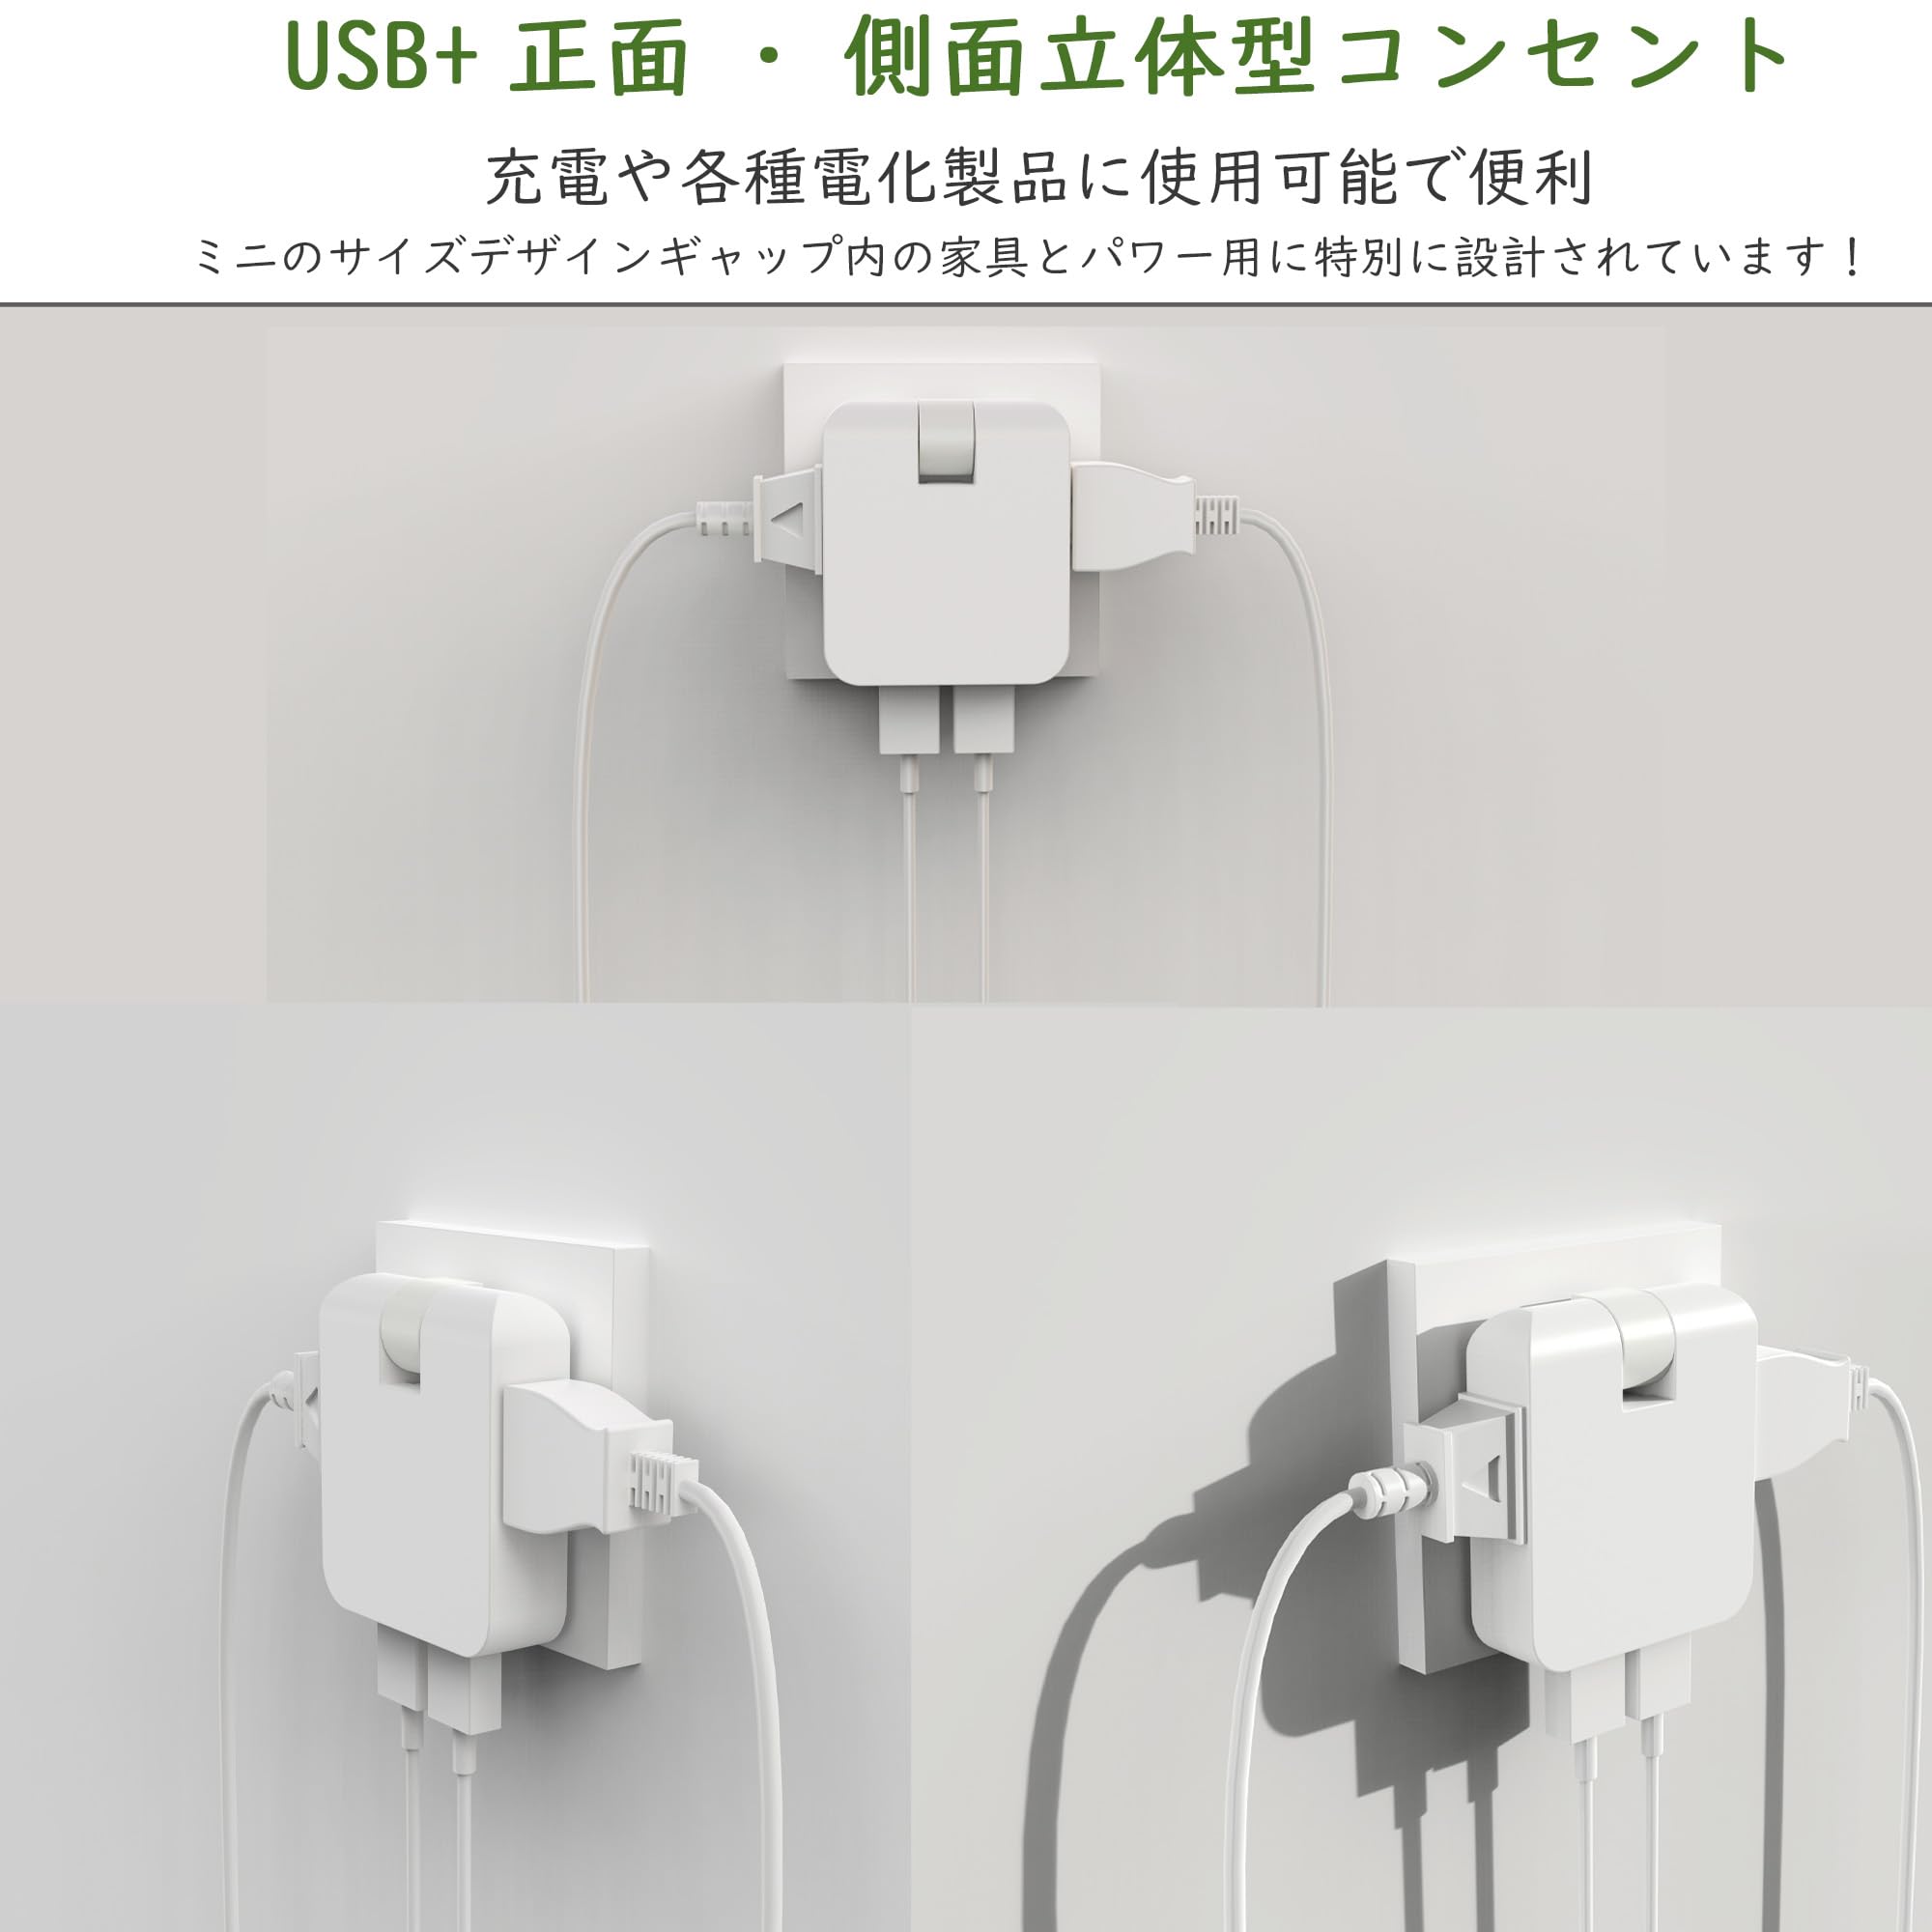 AKIRARI corner tap 4 mouth AC2 piece USB2 piece power supply tap USB attaching thin type swing plug wiring easy to do outlet flat Triple 